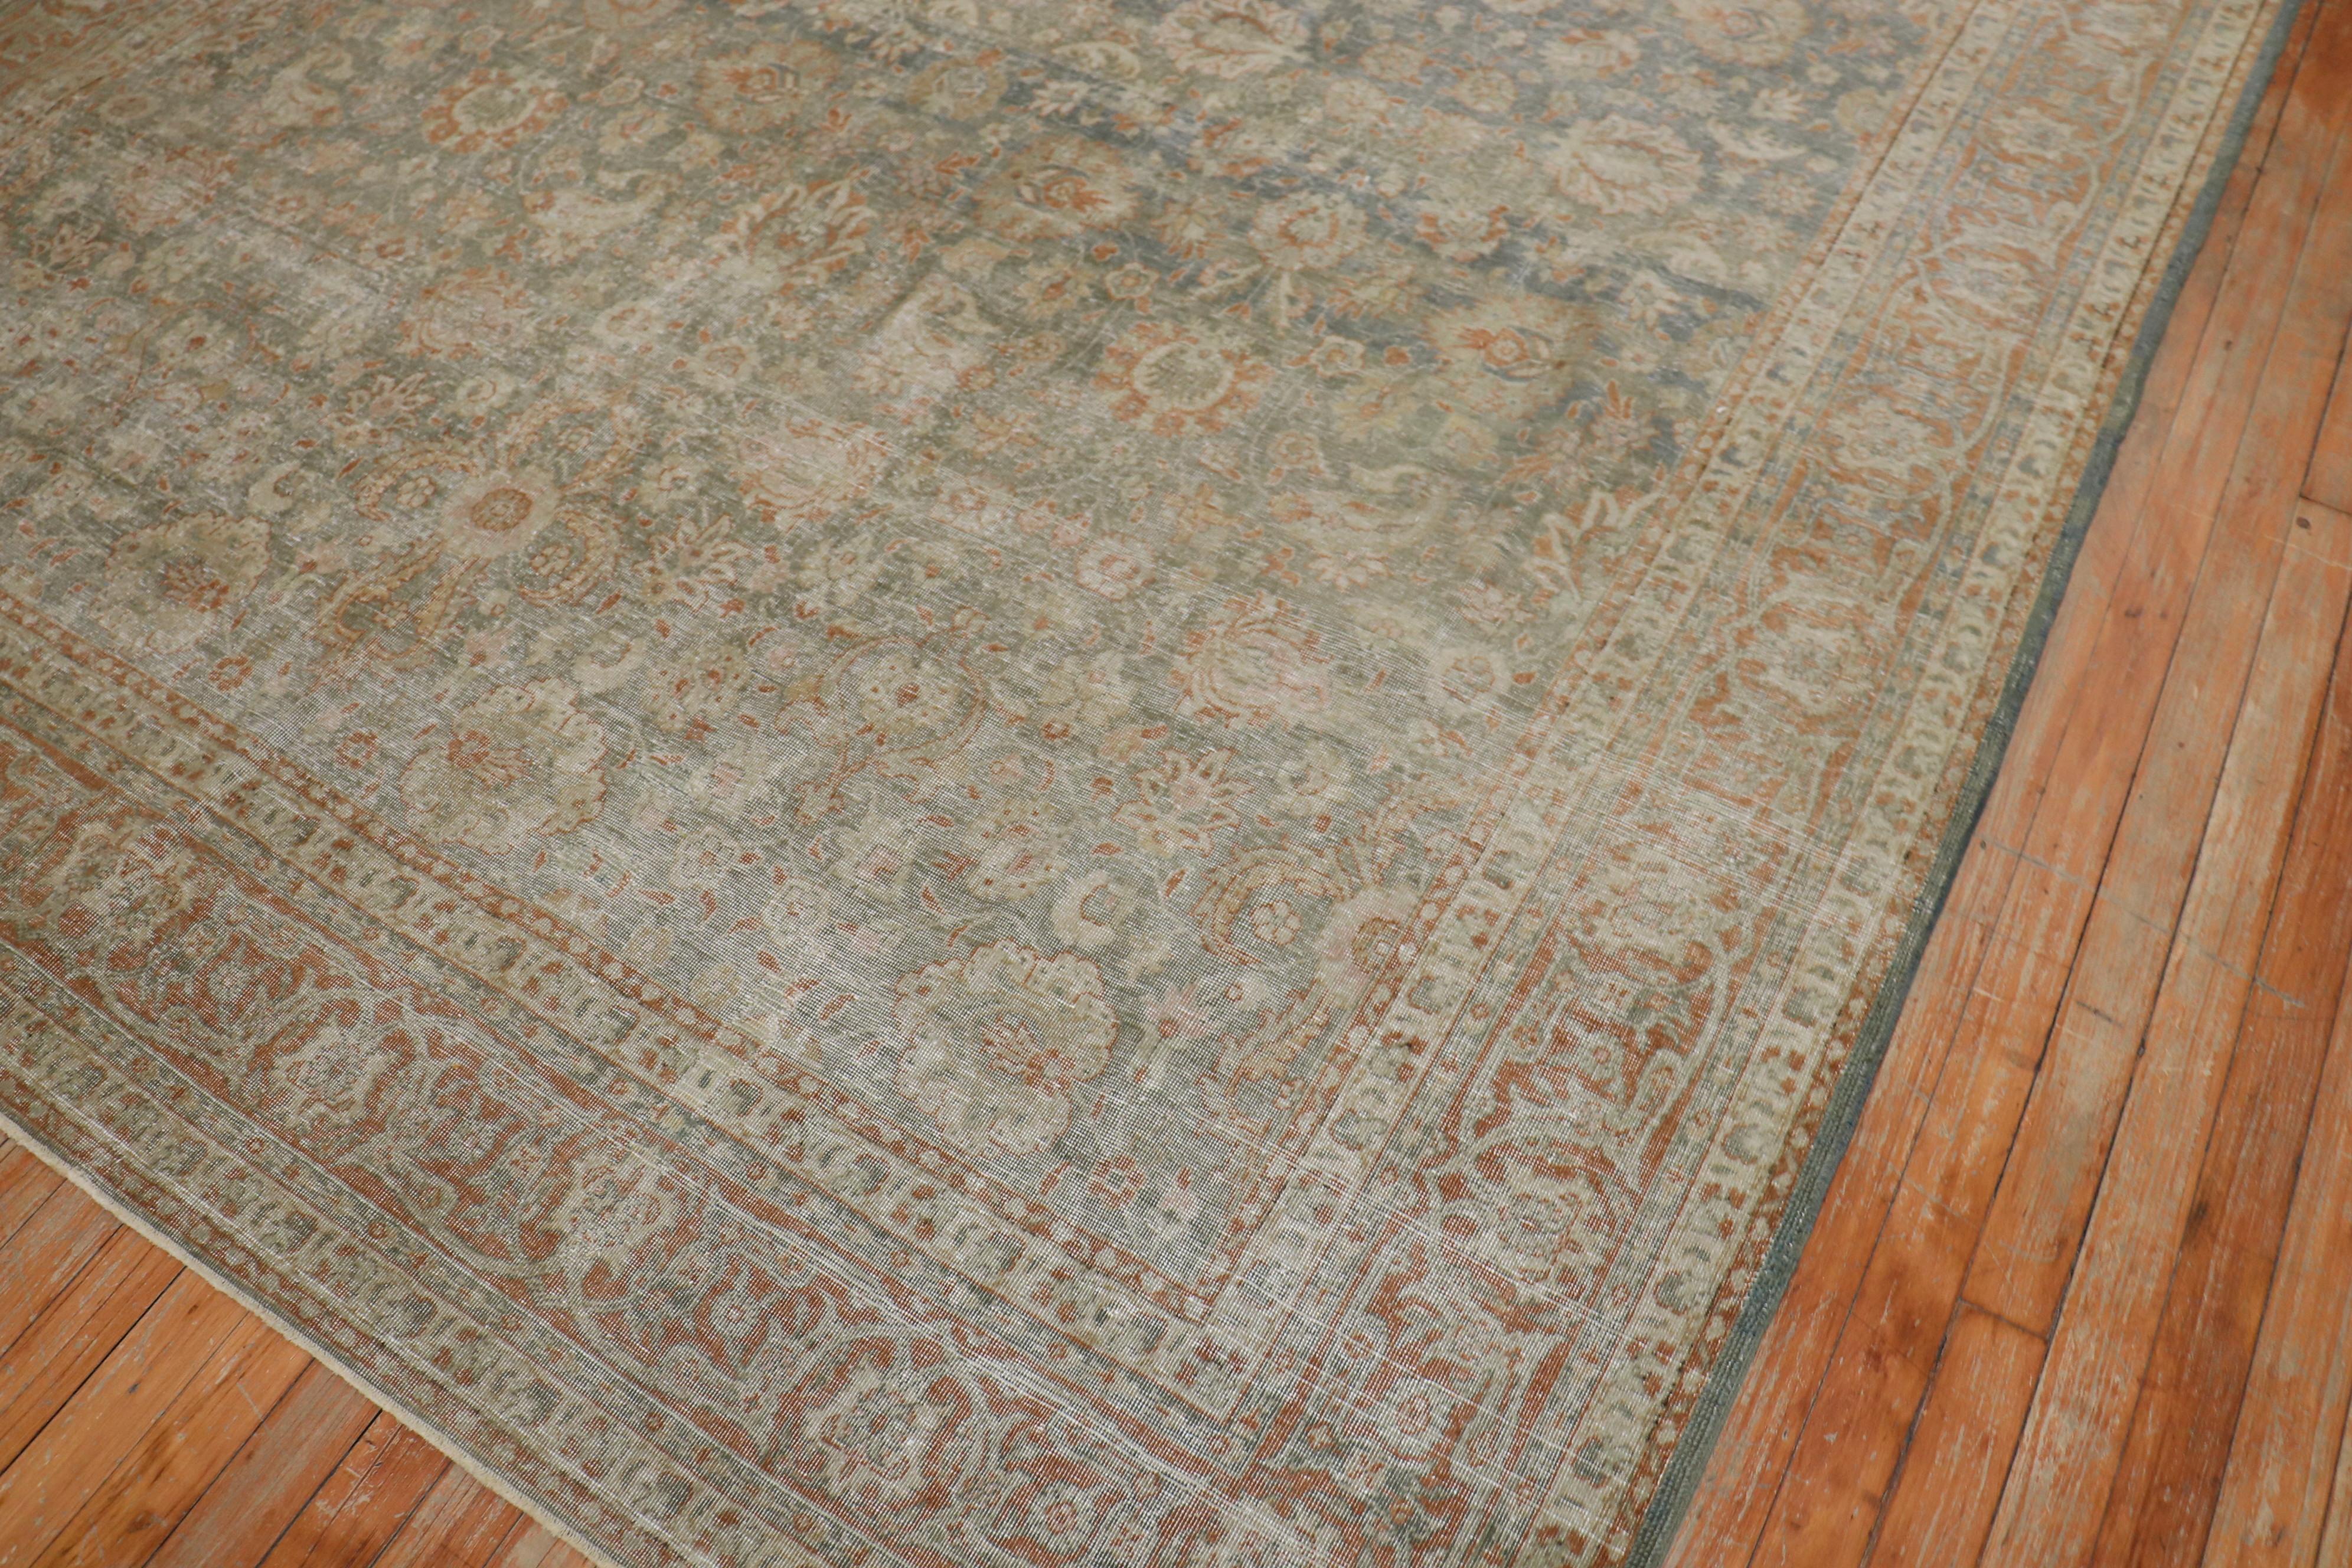 An early 20th century Persian Tabriz distressed rug in green and brown tones

Measures: 7'5'' x 9'7''

An antique Tabriz can be made of cotton or silk and woven as a pile carpet or flat-weave. A refined palette reliant on copper tones,